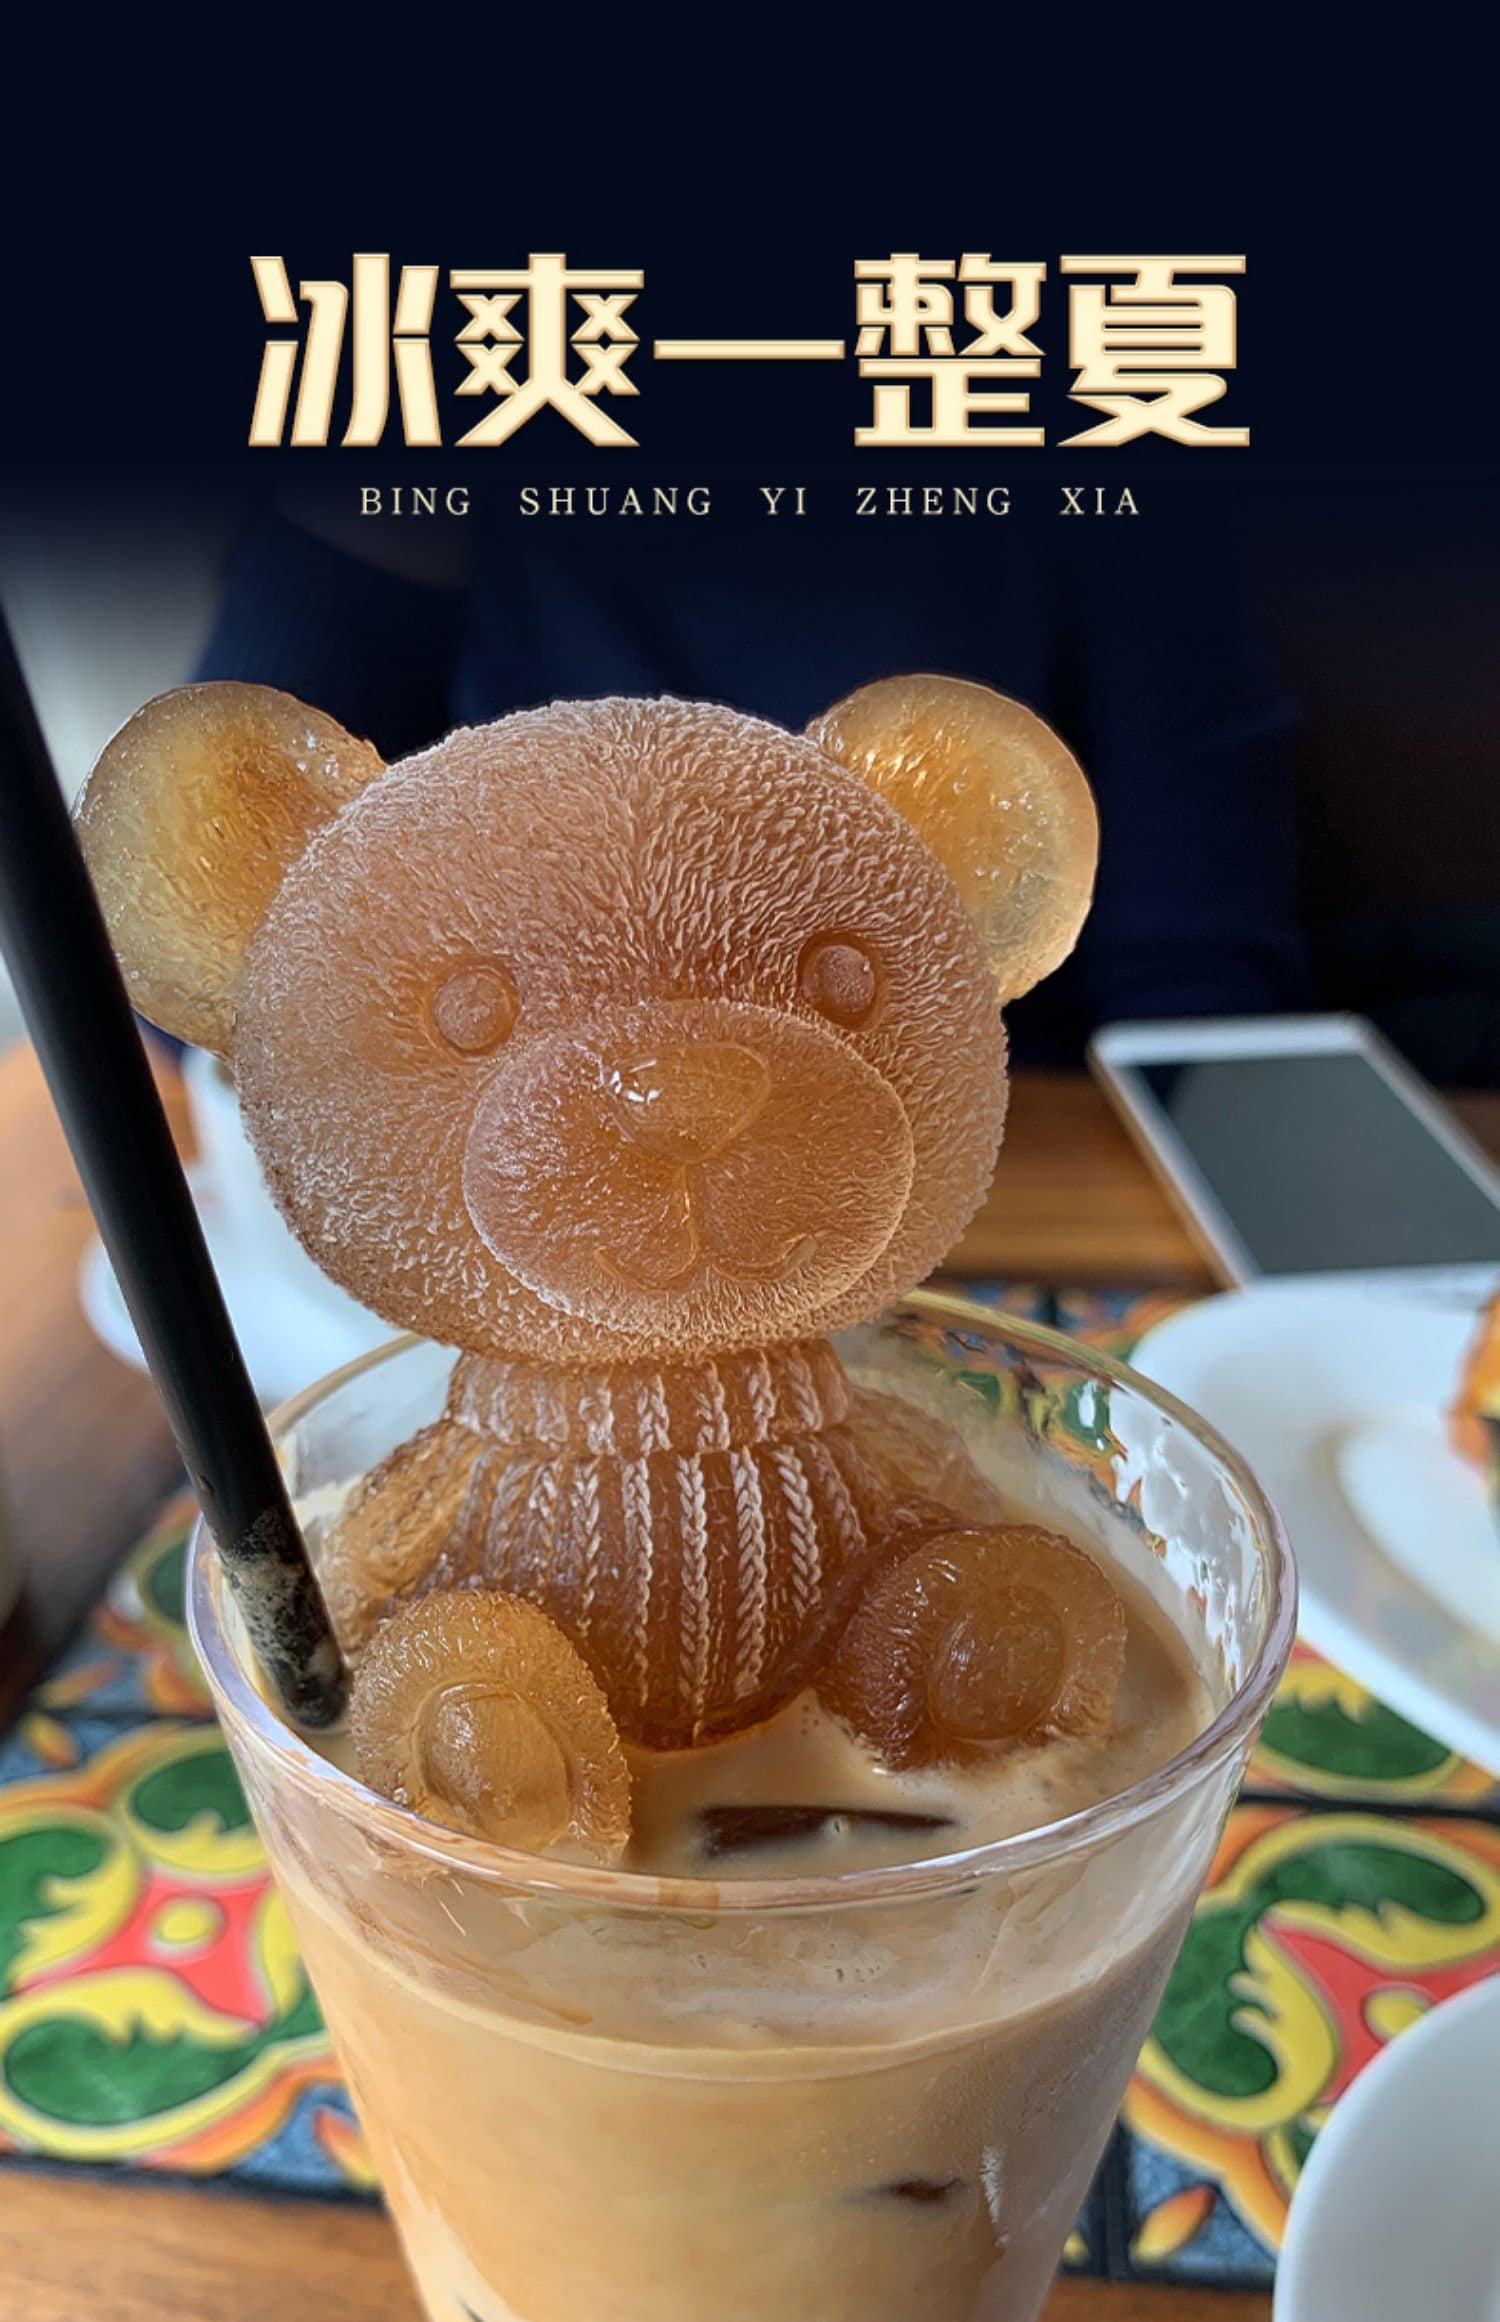 Bear Shaped Ice Cube Mold, 3d Silicone Bear Mold For Coffee, Milk